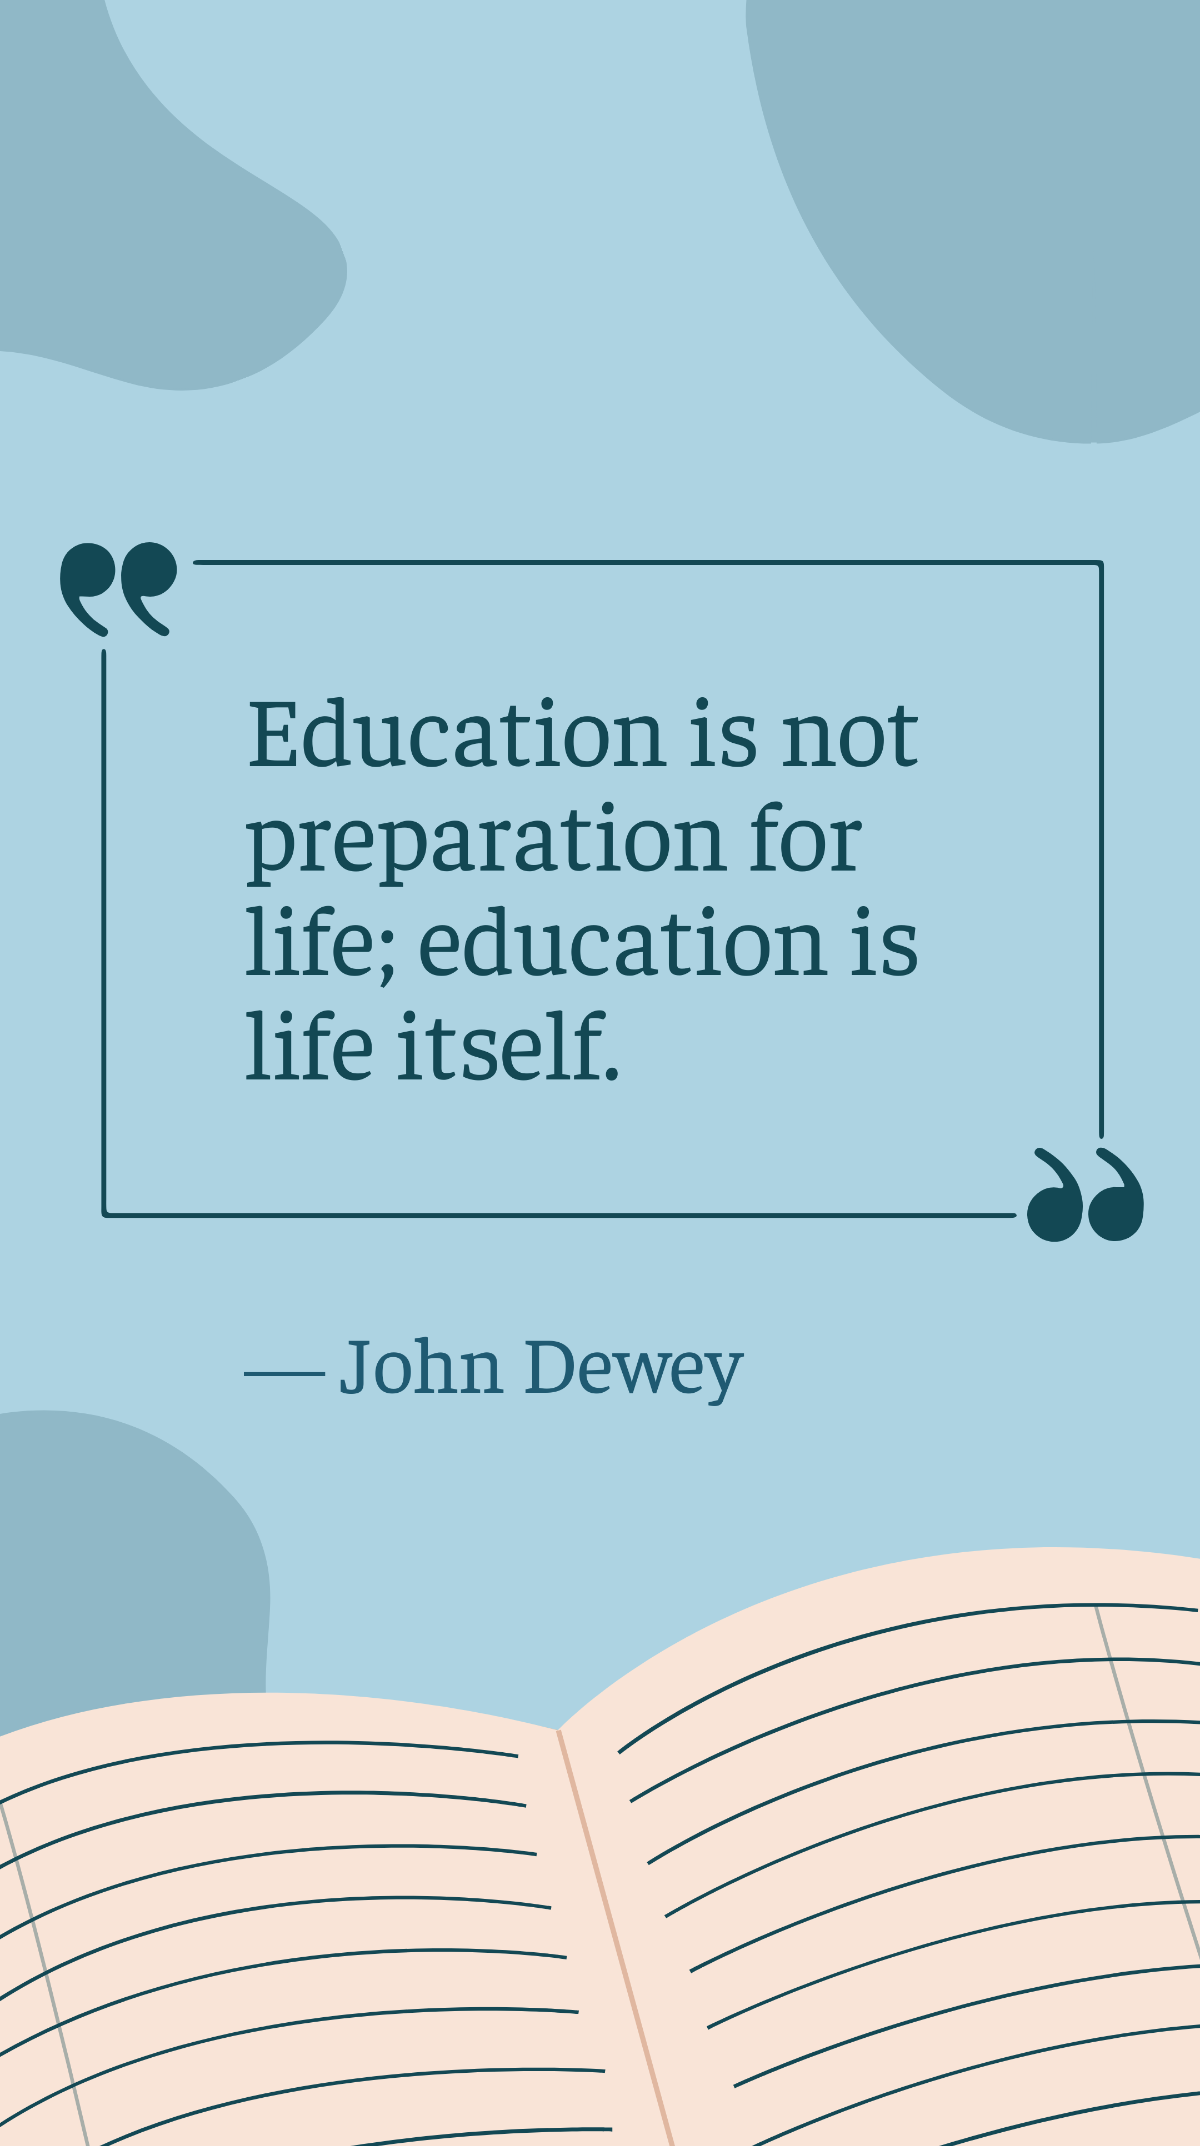 John Dewey - Education is not preparation for life; education is life itself.